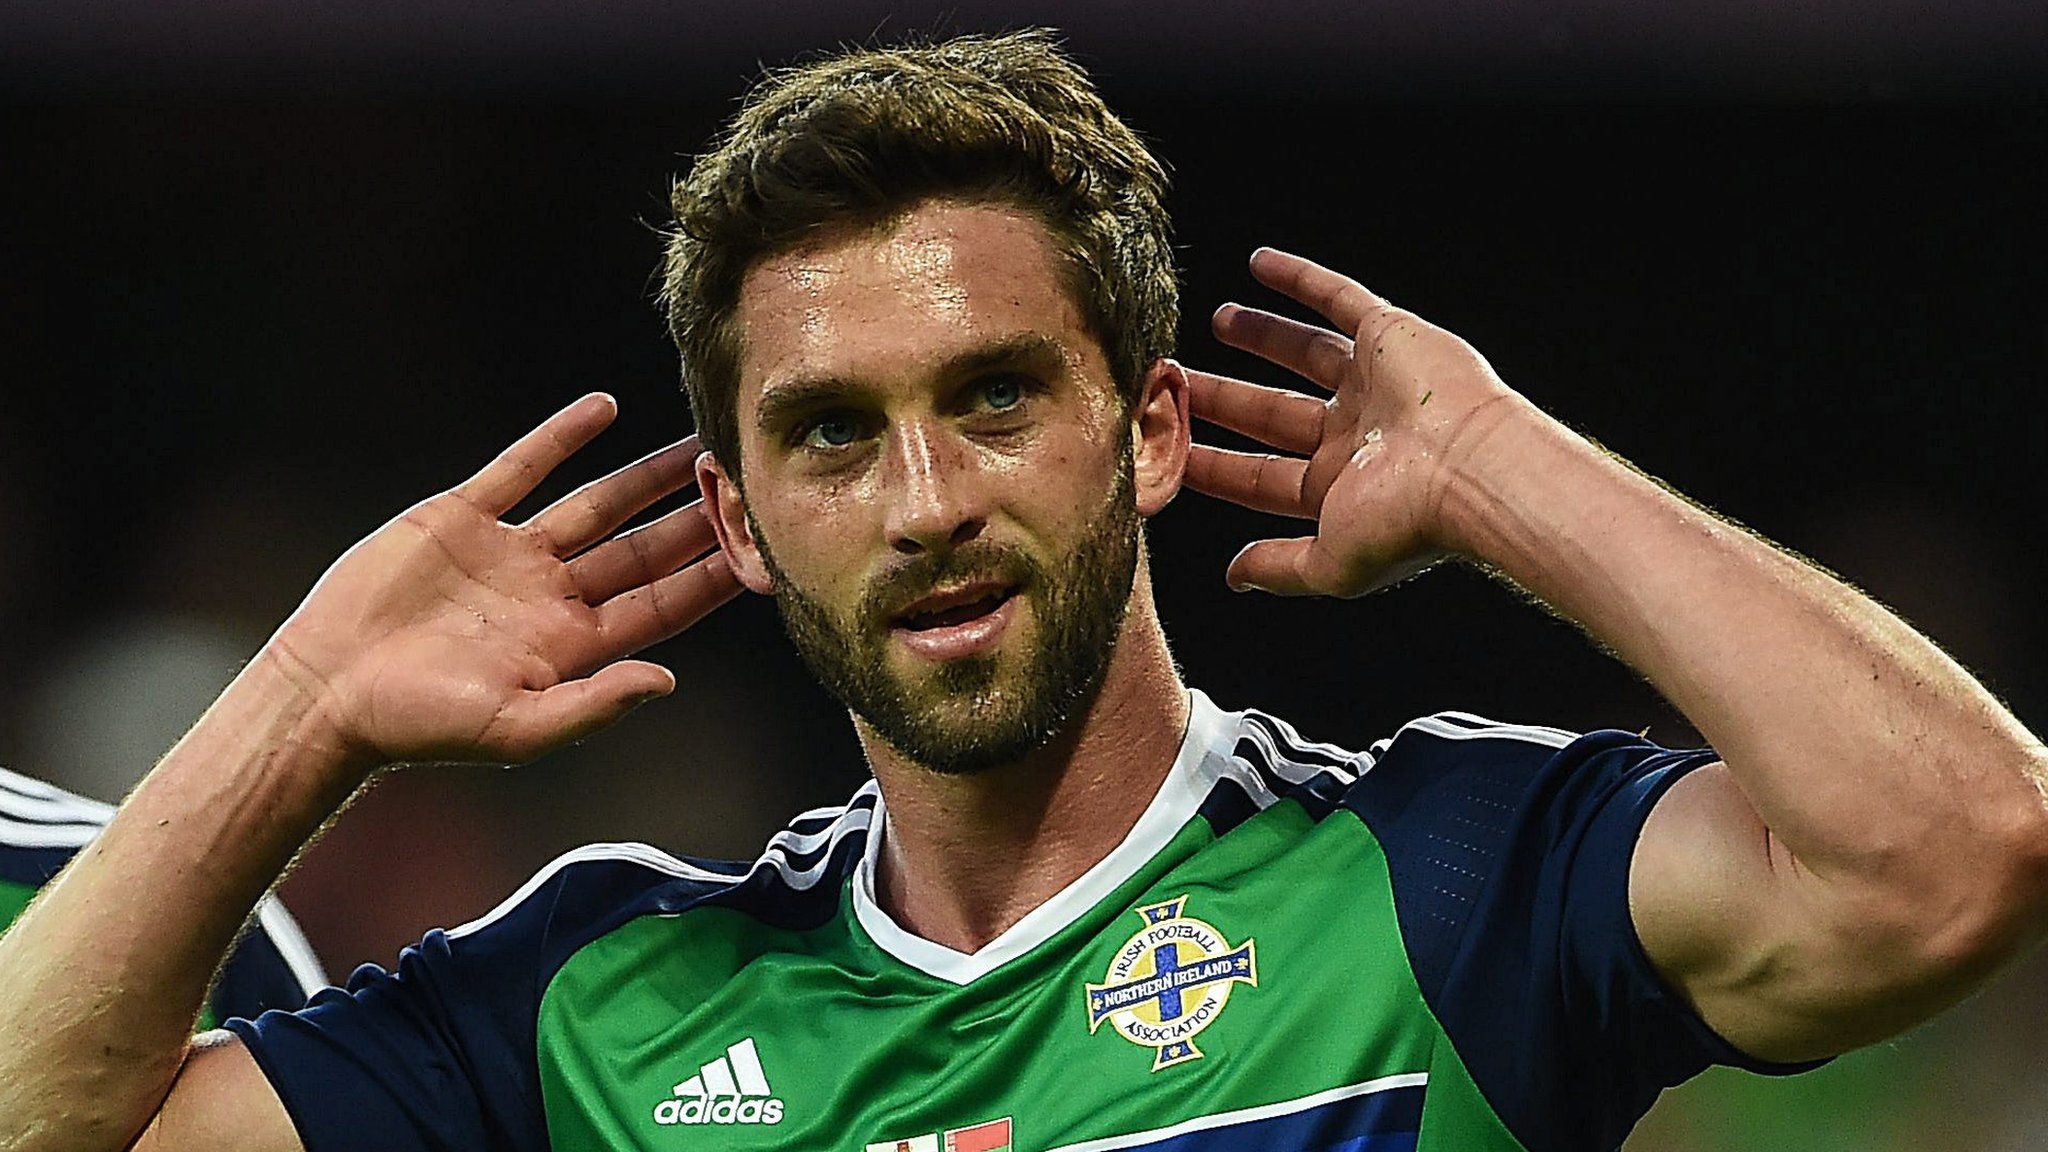 Will Grigg